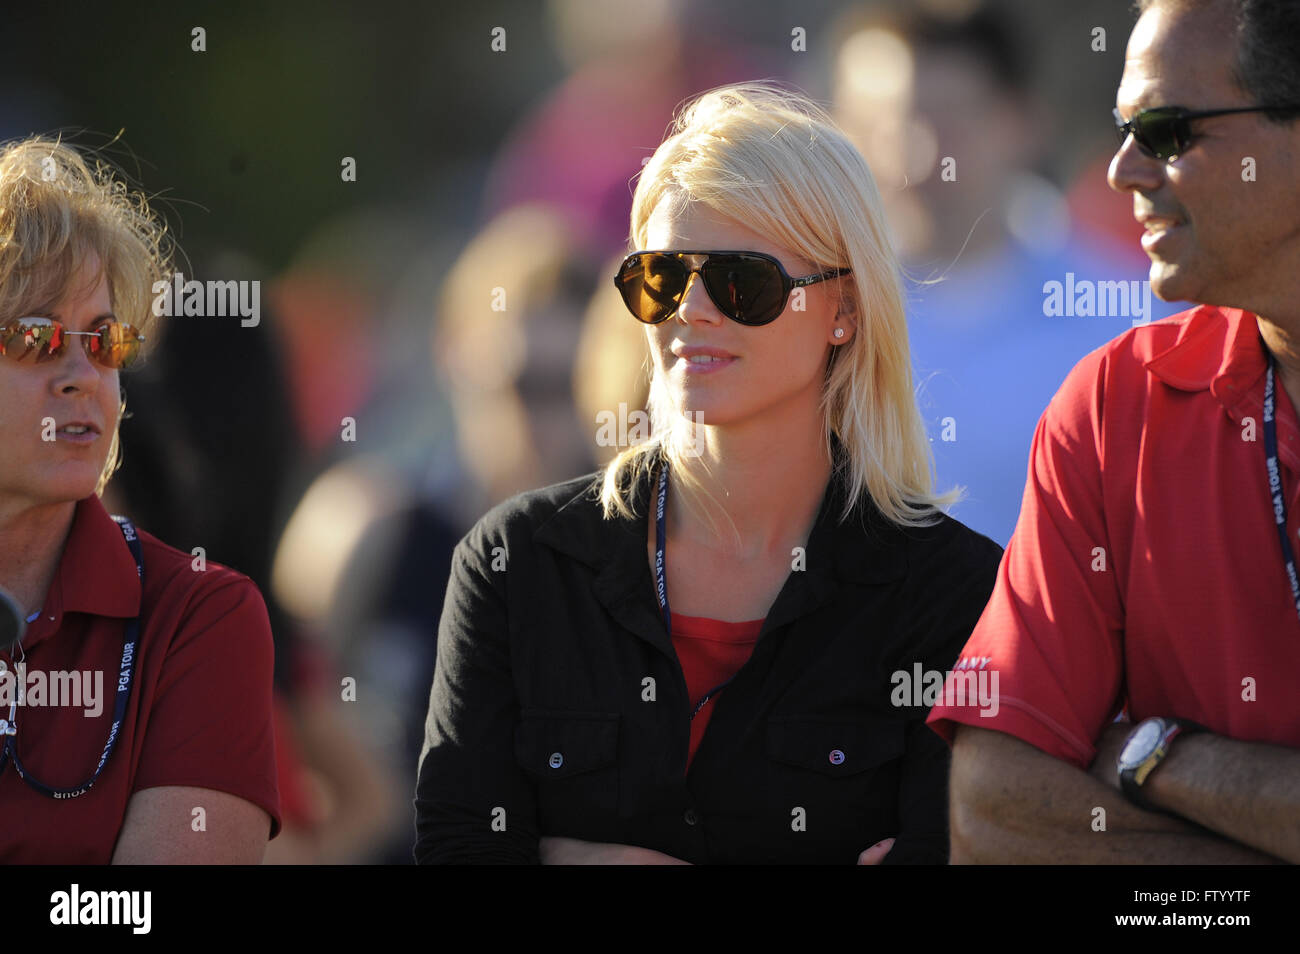 Orlando, Florida, USA. 29th Mar, 2009. Tiger Woods' wife, Elin Woods, during the final round of the Arnold Palmer Invitational at the Bay Hill Club and Lodge on March 29, 2009 in Orlando, Florida. © Scott A. Miller/ZUMA Wire/Alamy Live News Stock Photo